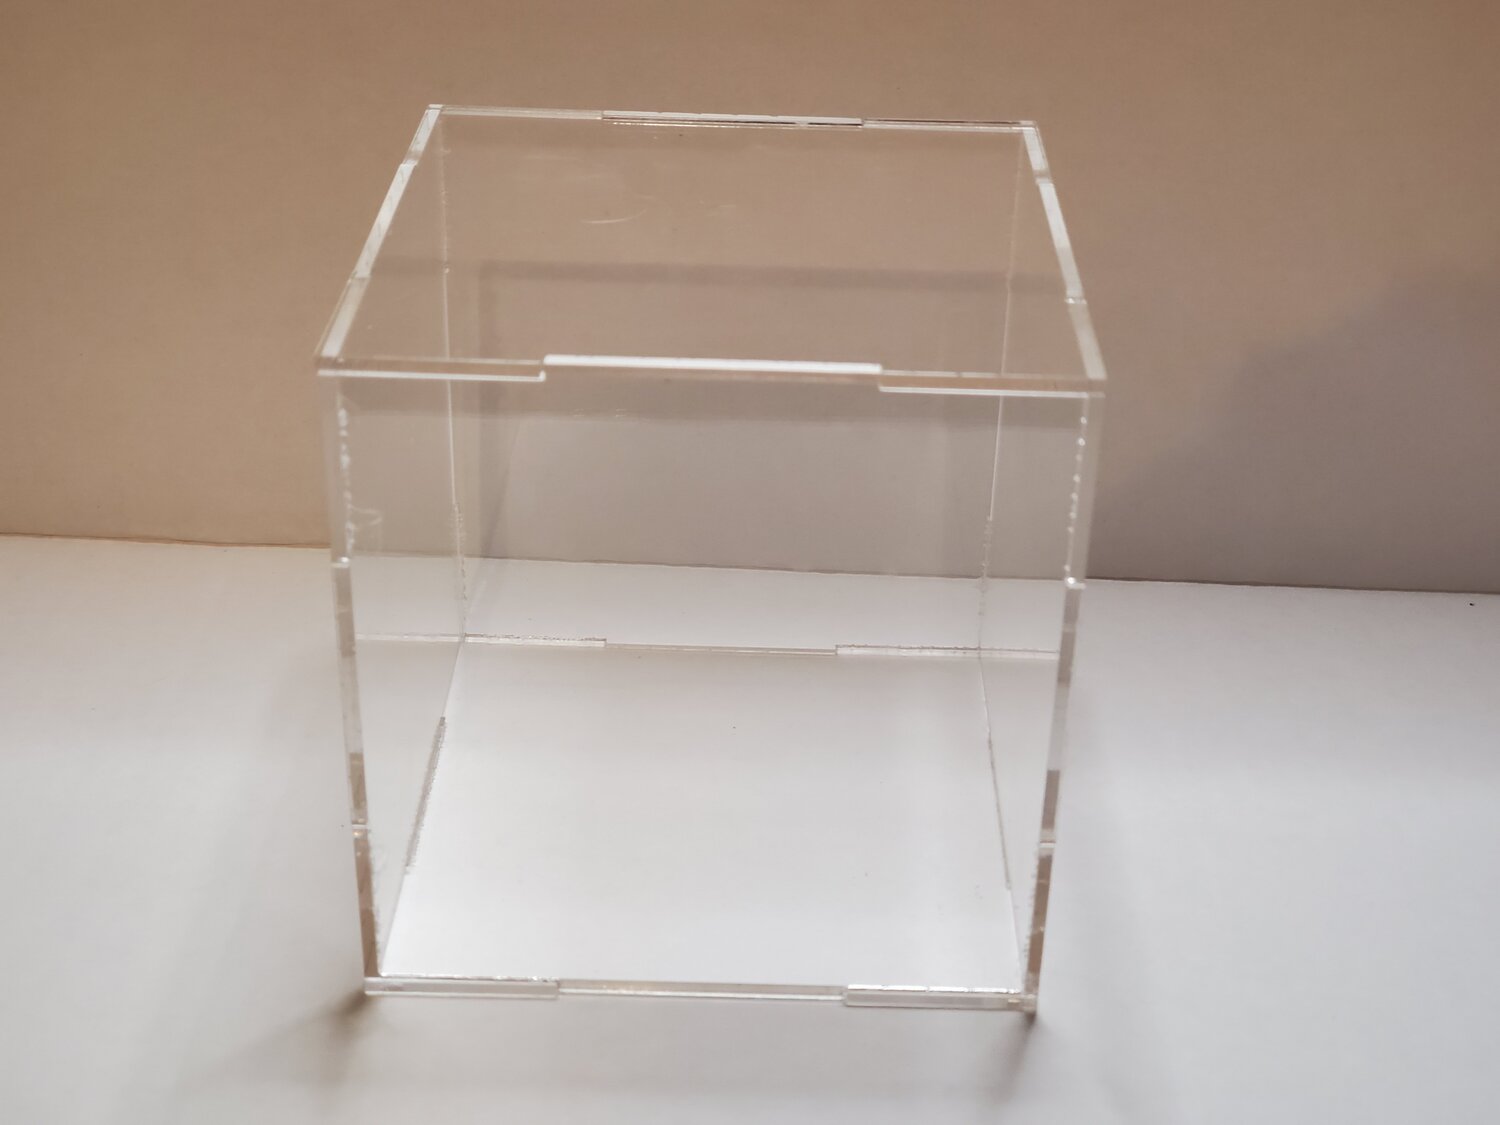 Details about   Acrylic Storage and Display Case 3x Booster Pack 